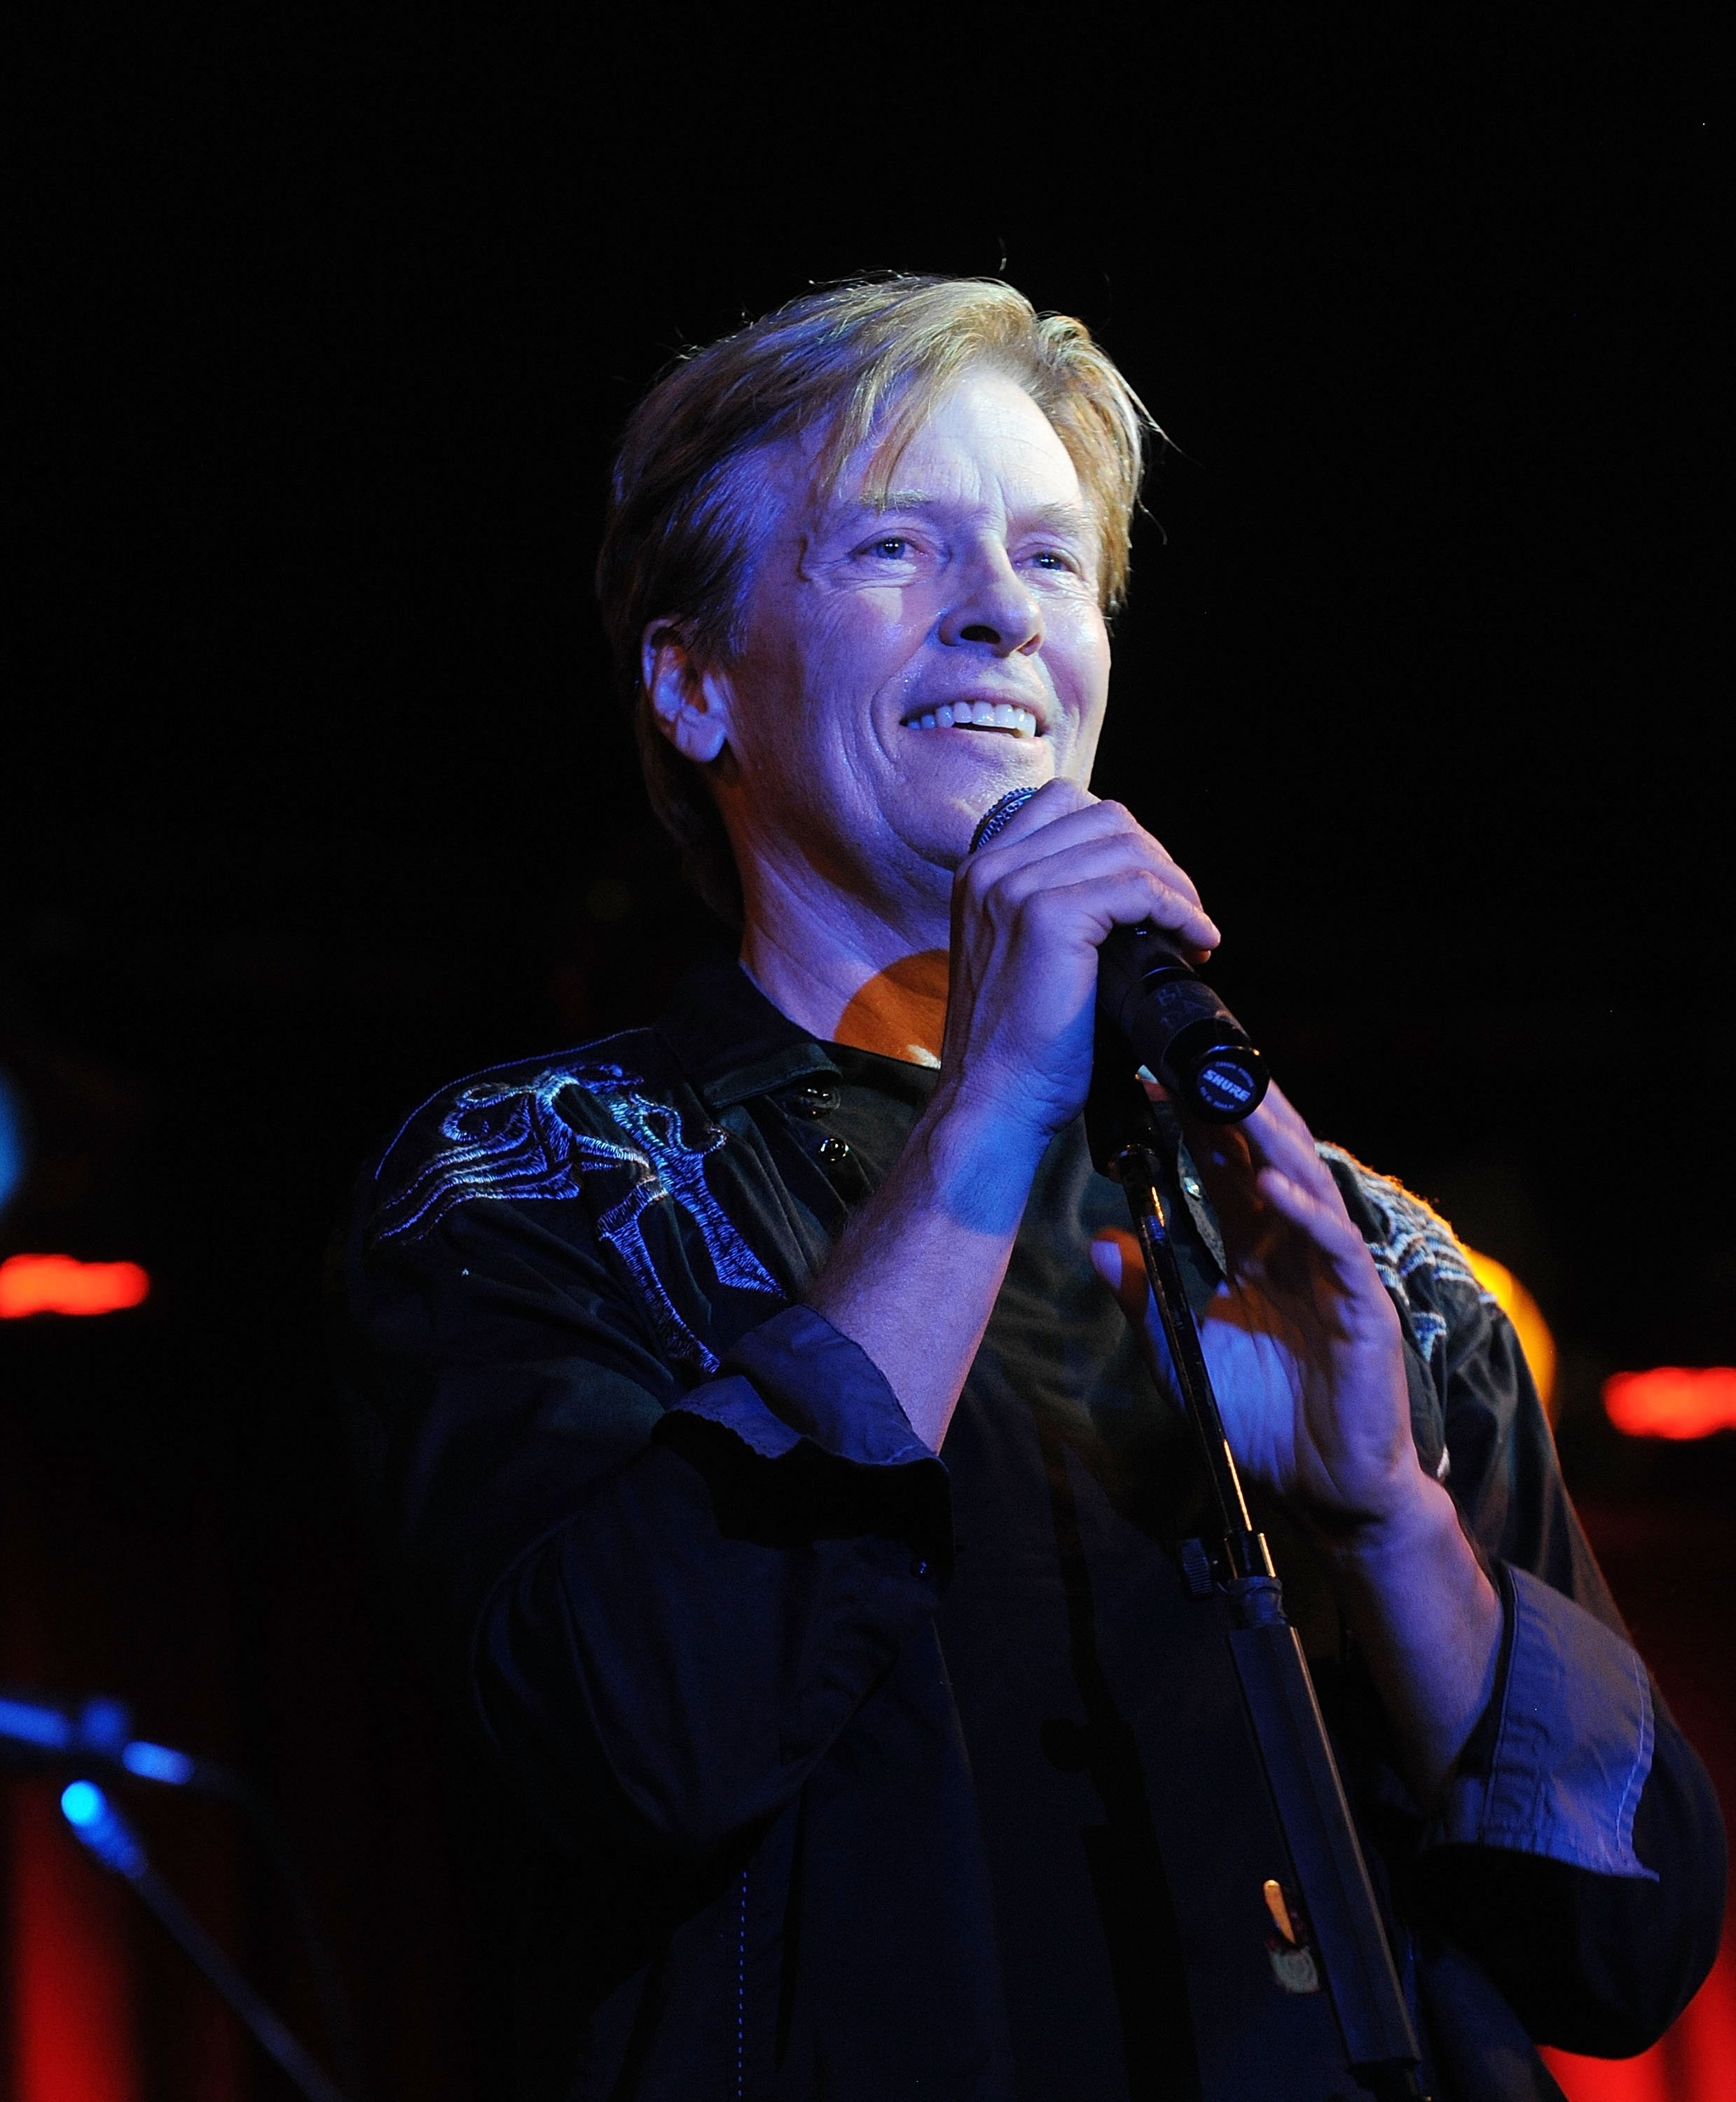 Singer Jack Wagner performs at B.B. King Blues Club & Grill on April 9, 2015 in New York City.┃Source: Getty Images